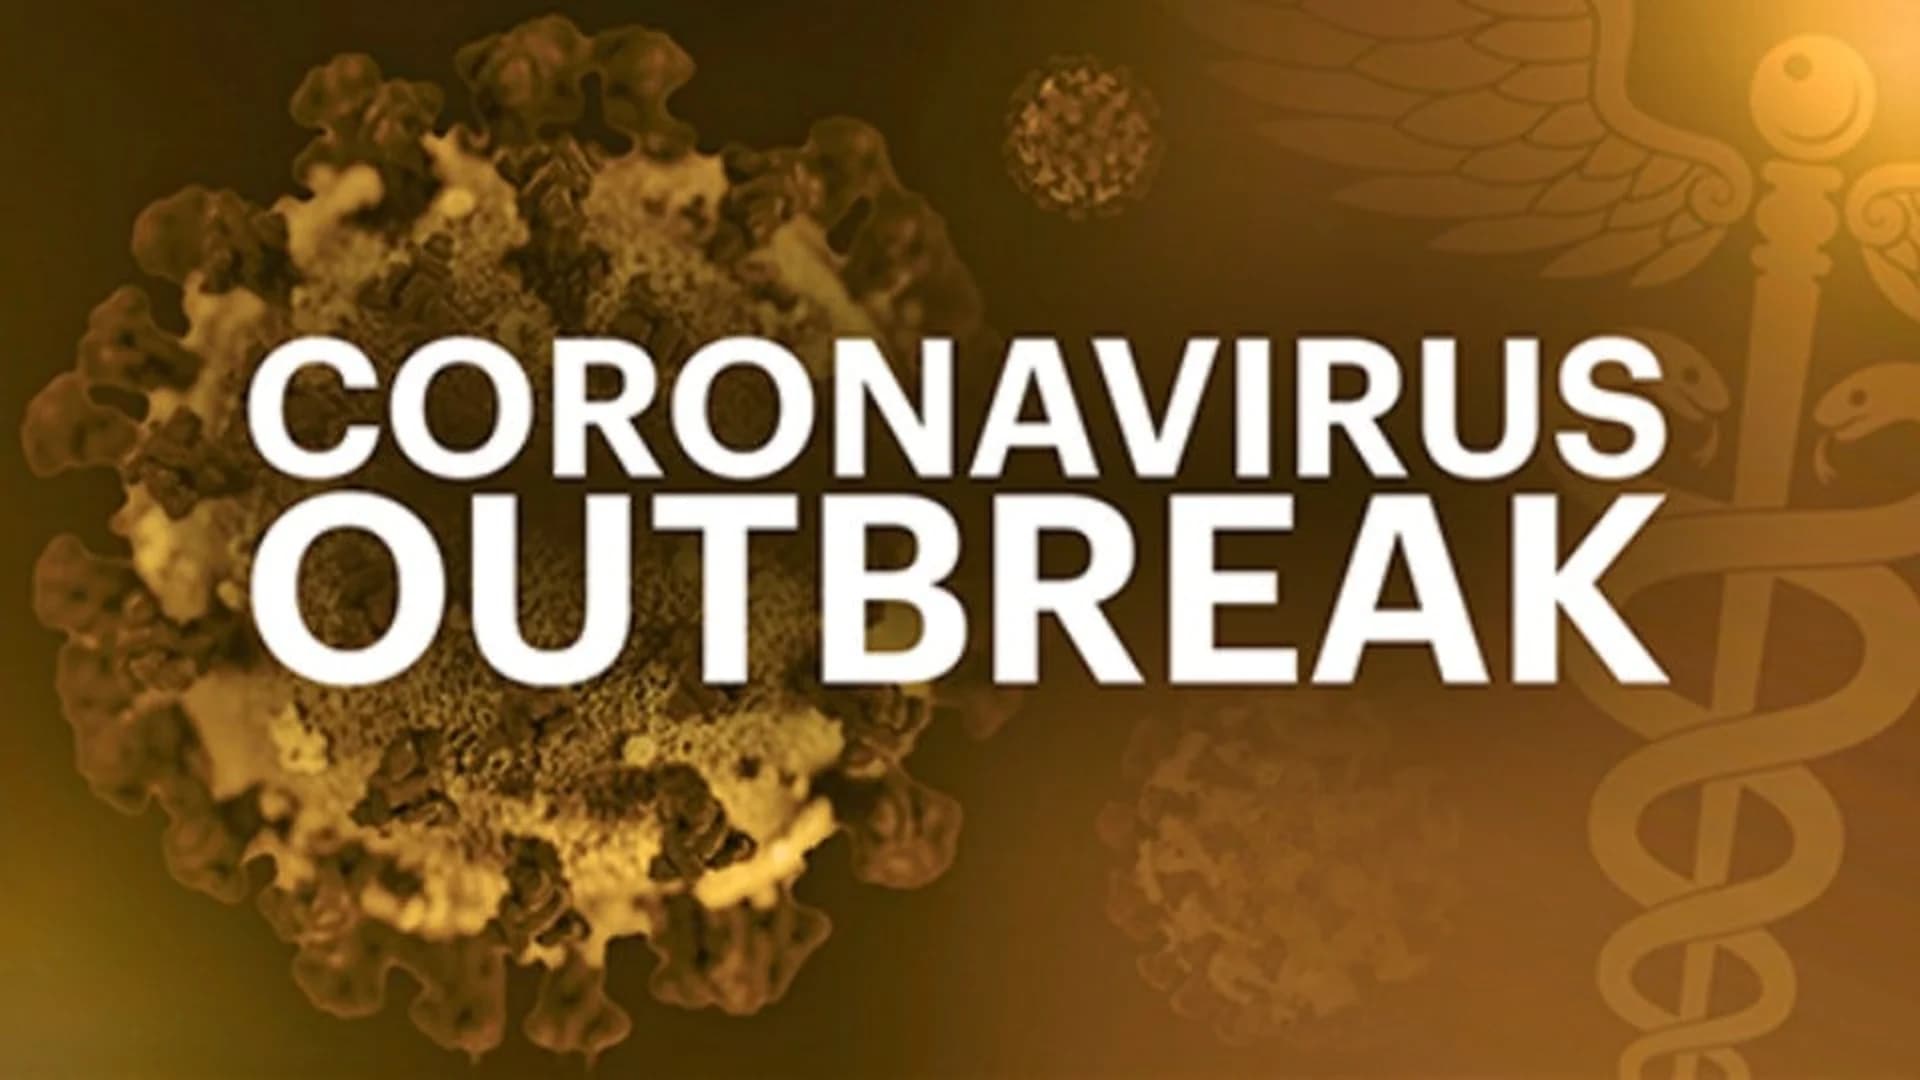 Gov. Cuomo gives update after more coronavirus cases confirmed in NY